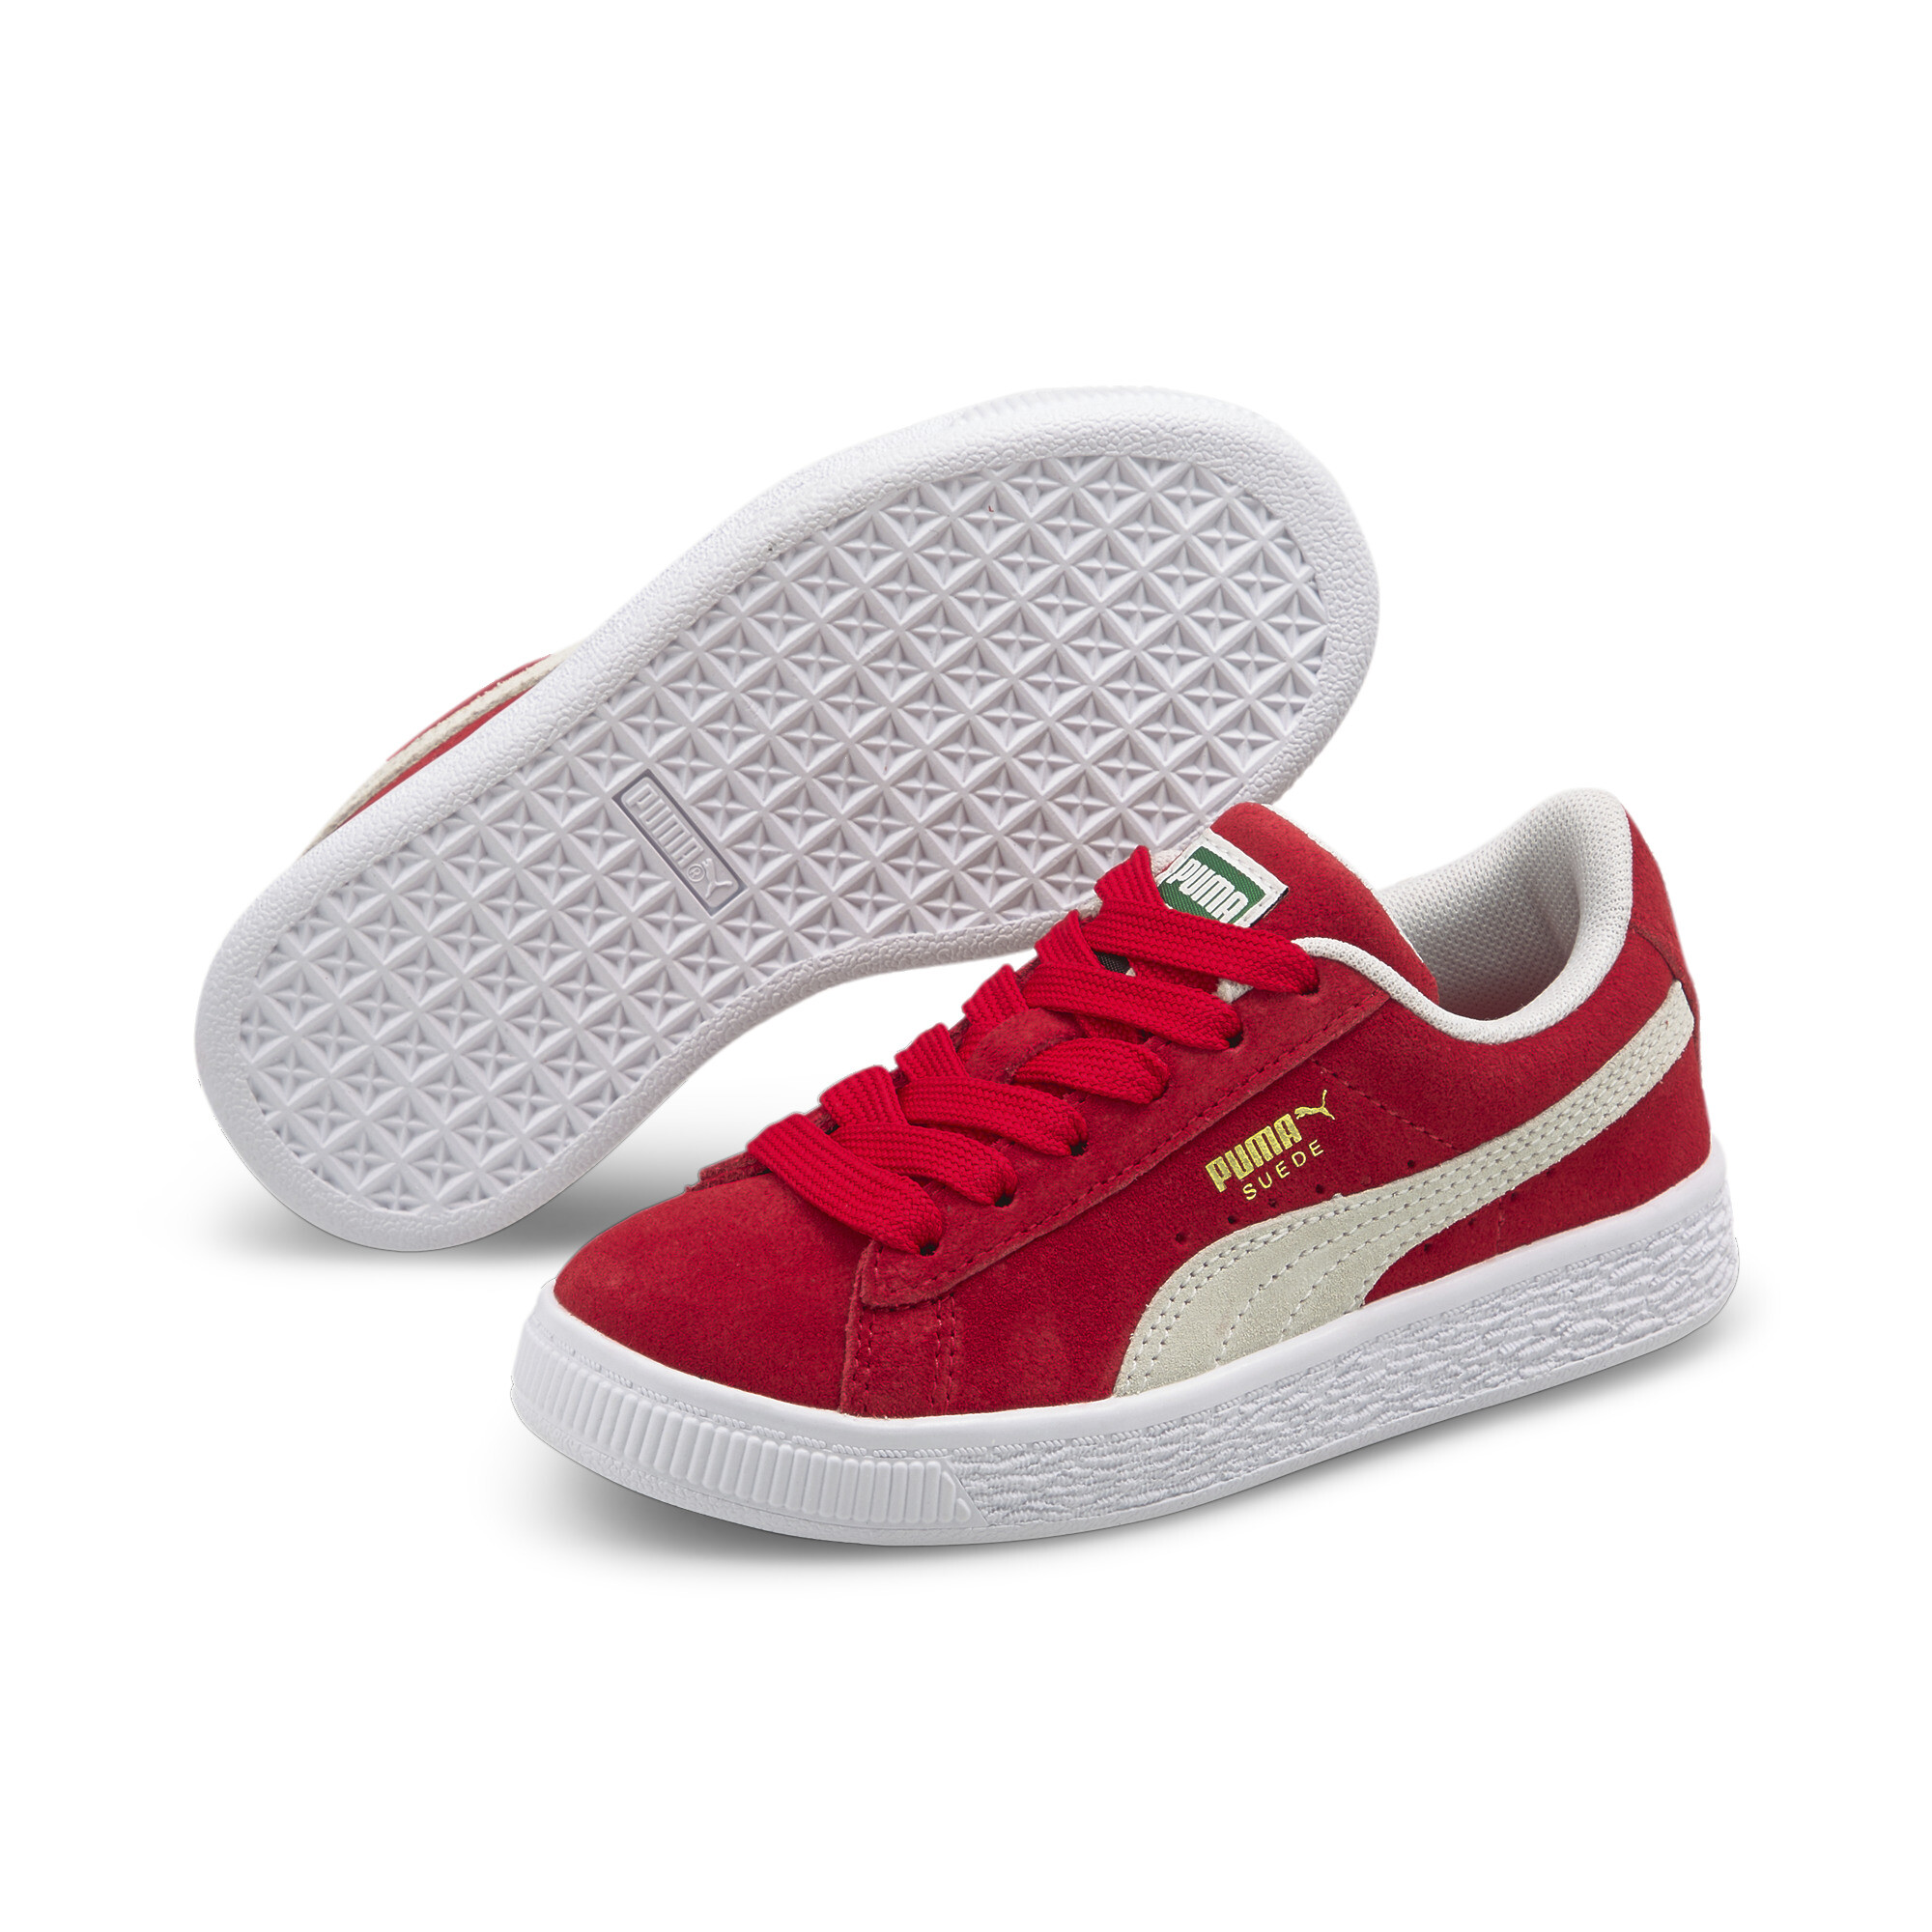 Puma Suede Classic XXI Kids' Trainers, Red, Size 28, Shoes